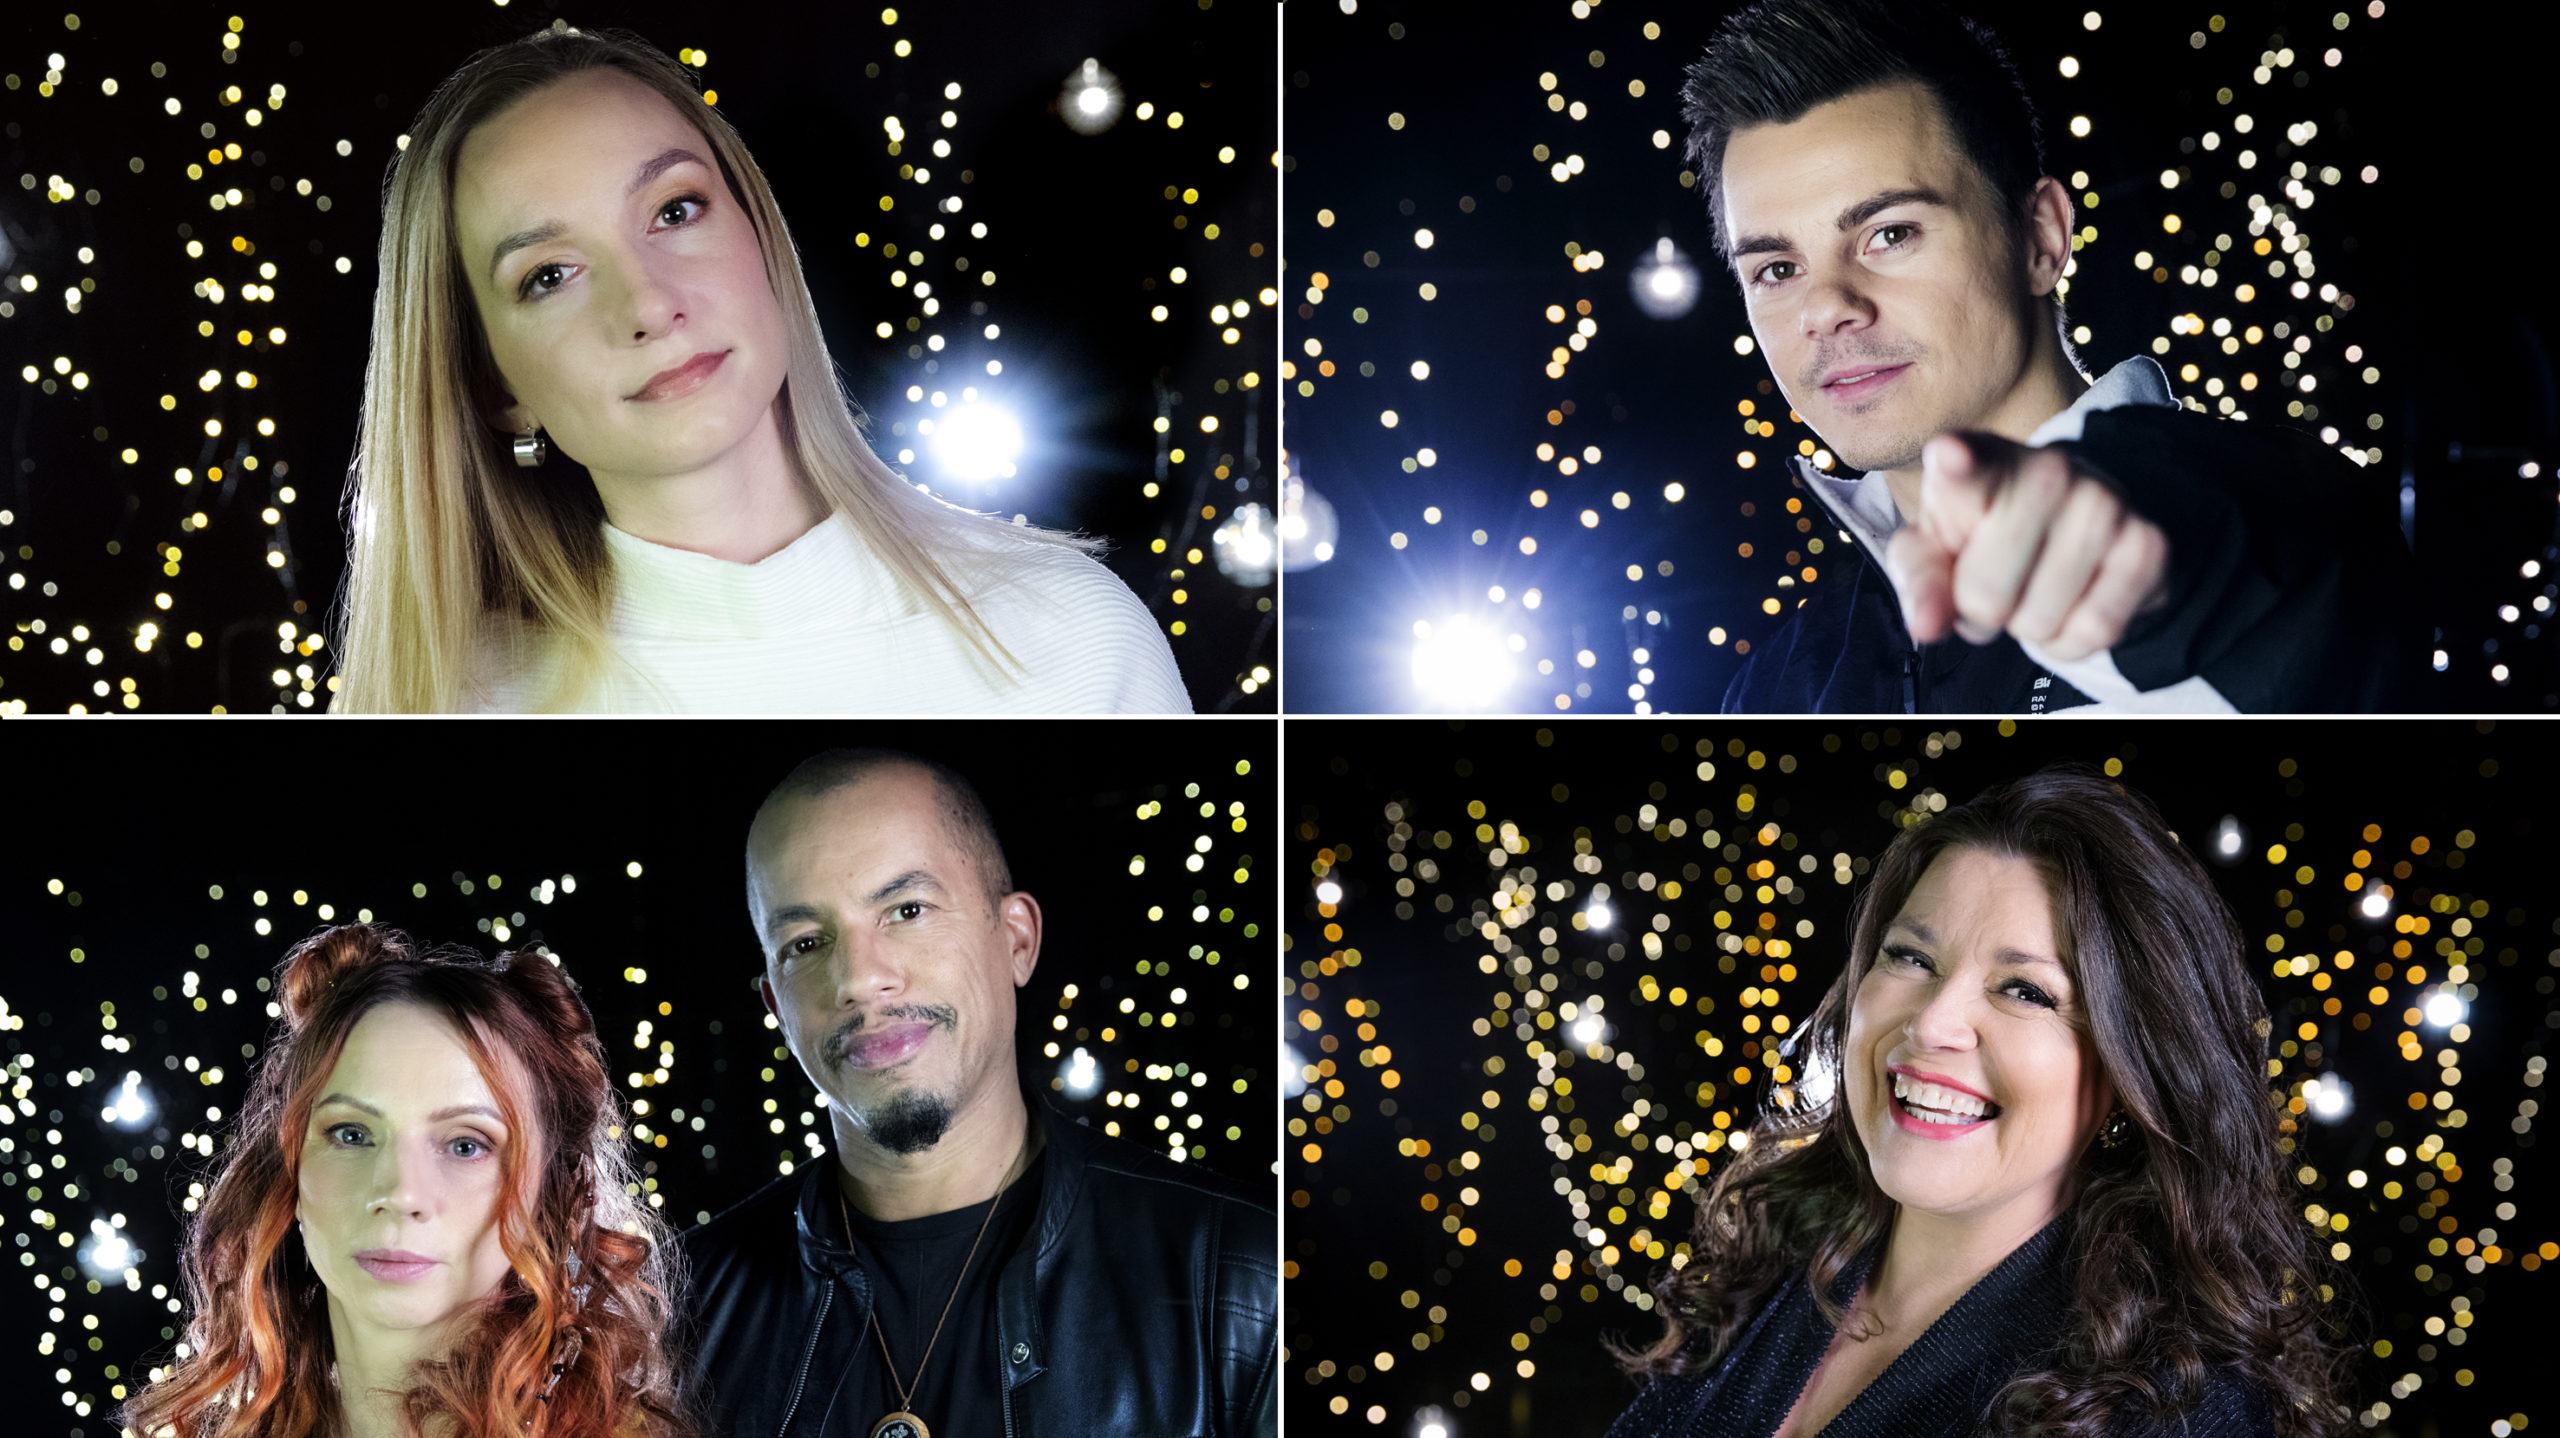 Norway: These are the last four semi-finalists of Melodi Grand Prix 2020